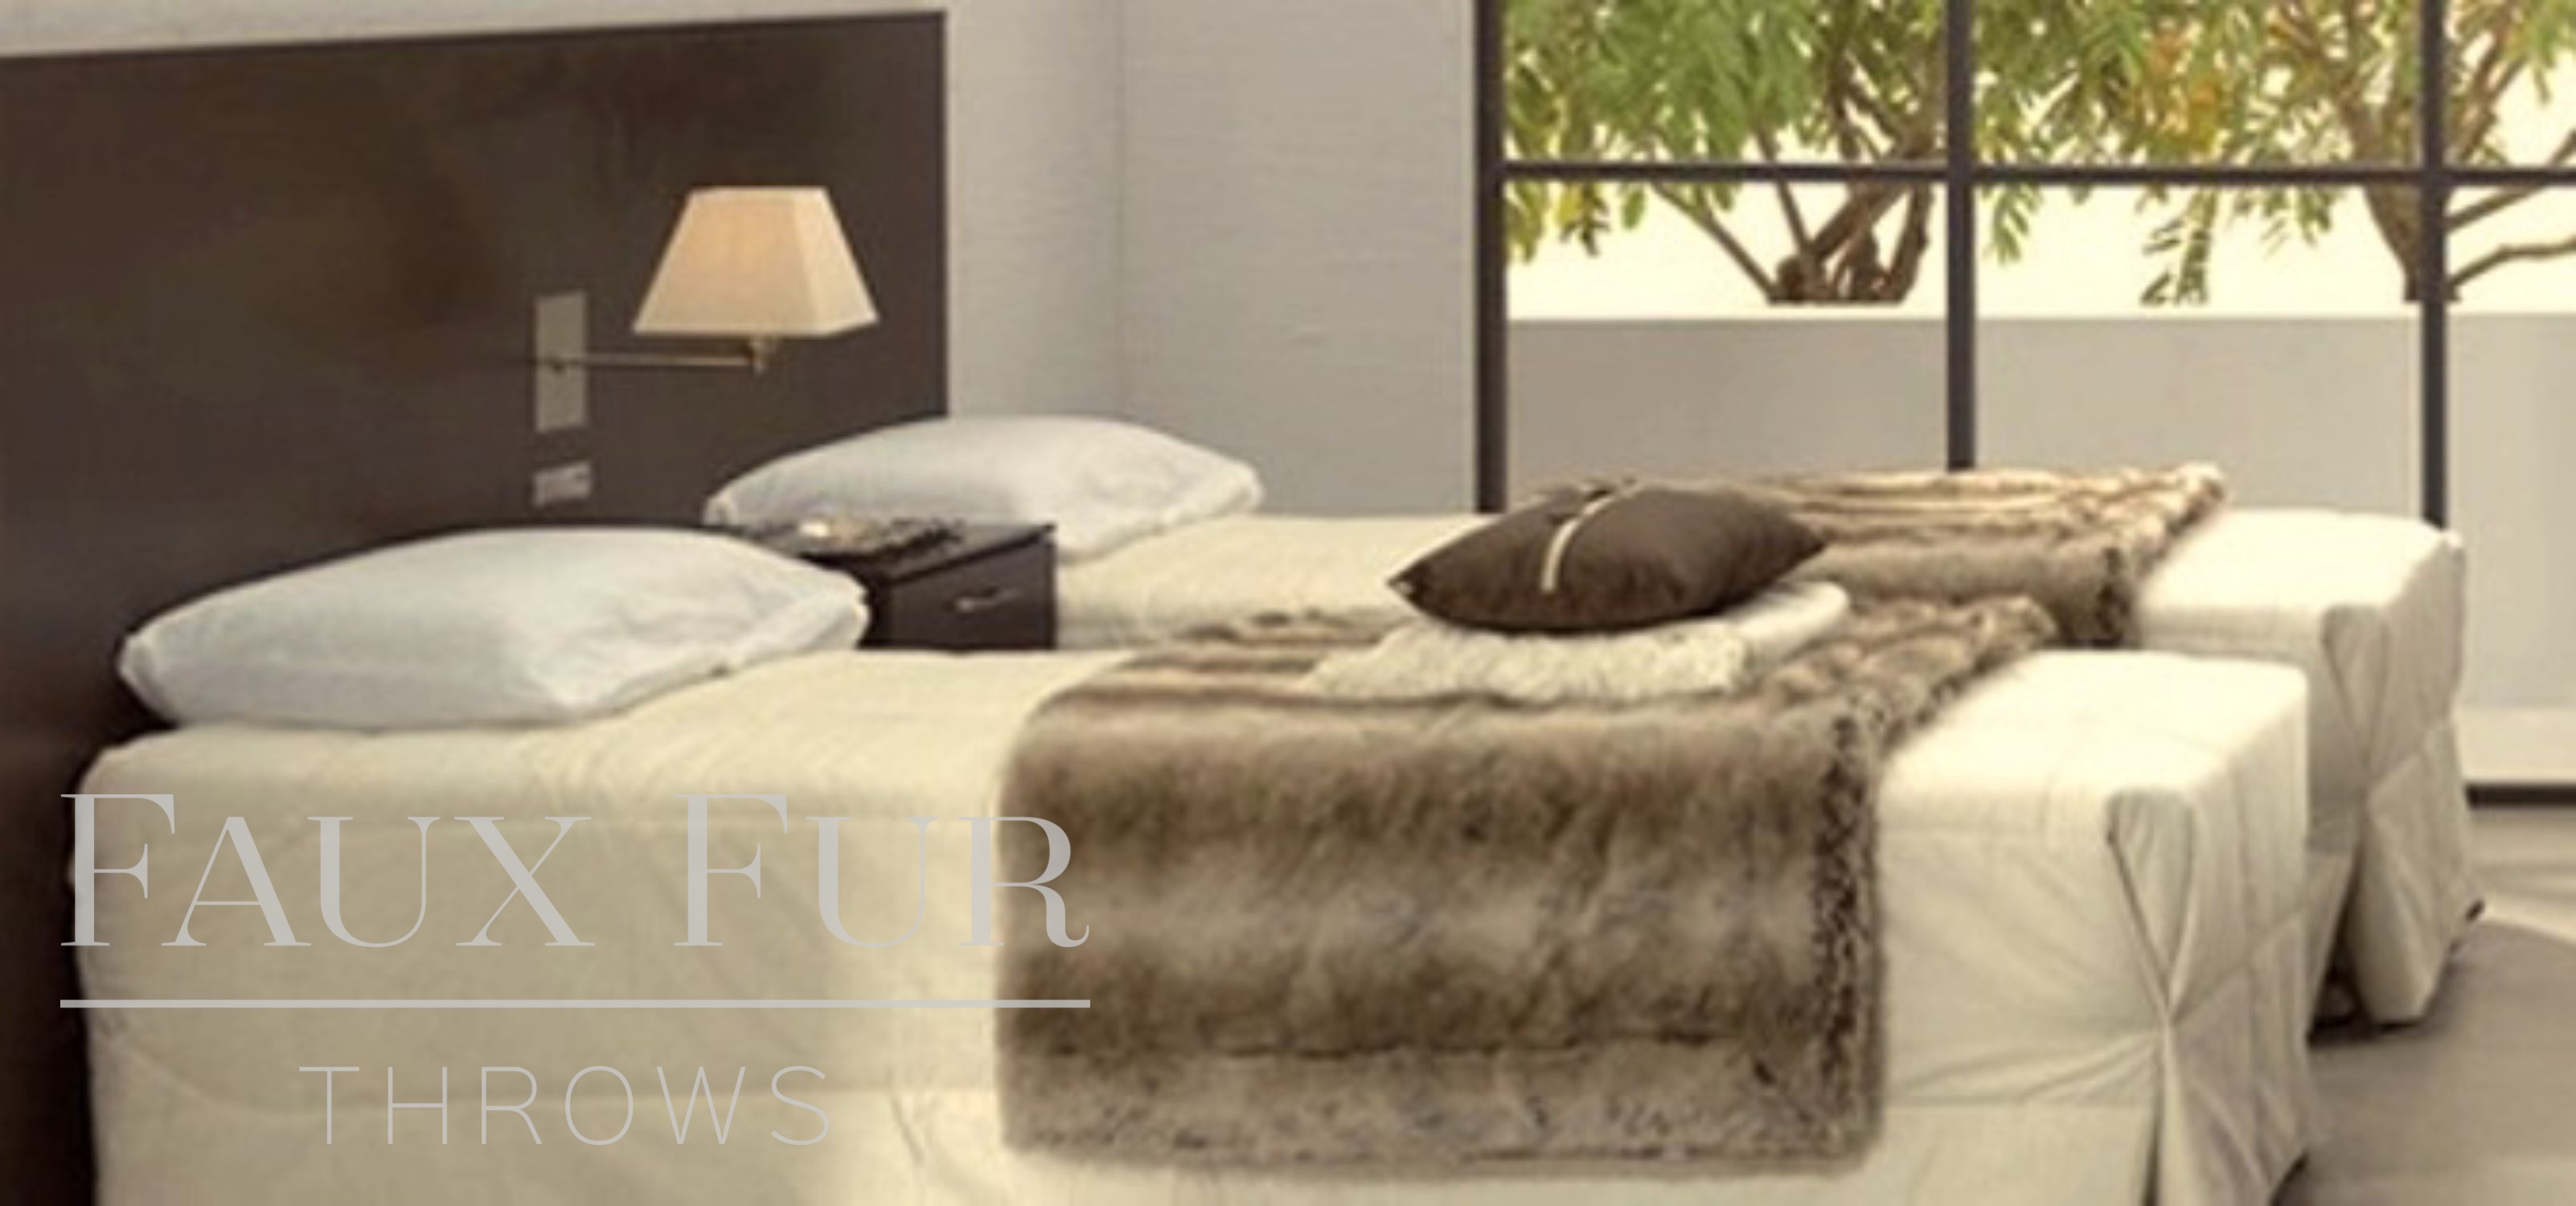 faux fur bed throw